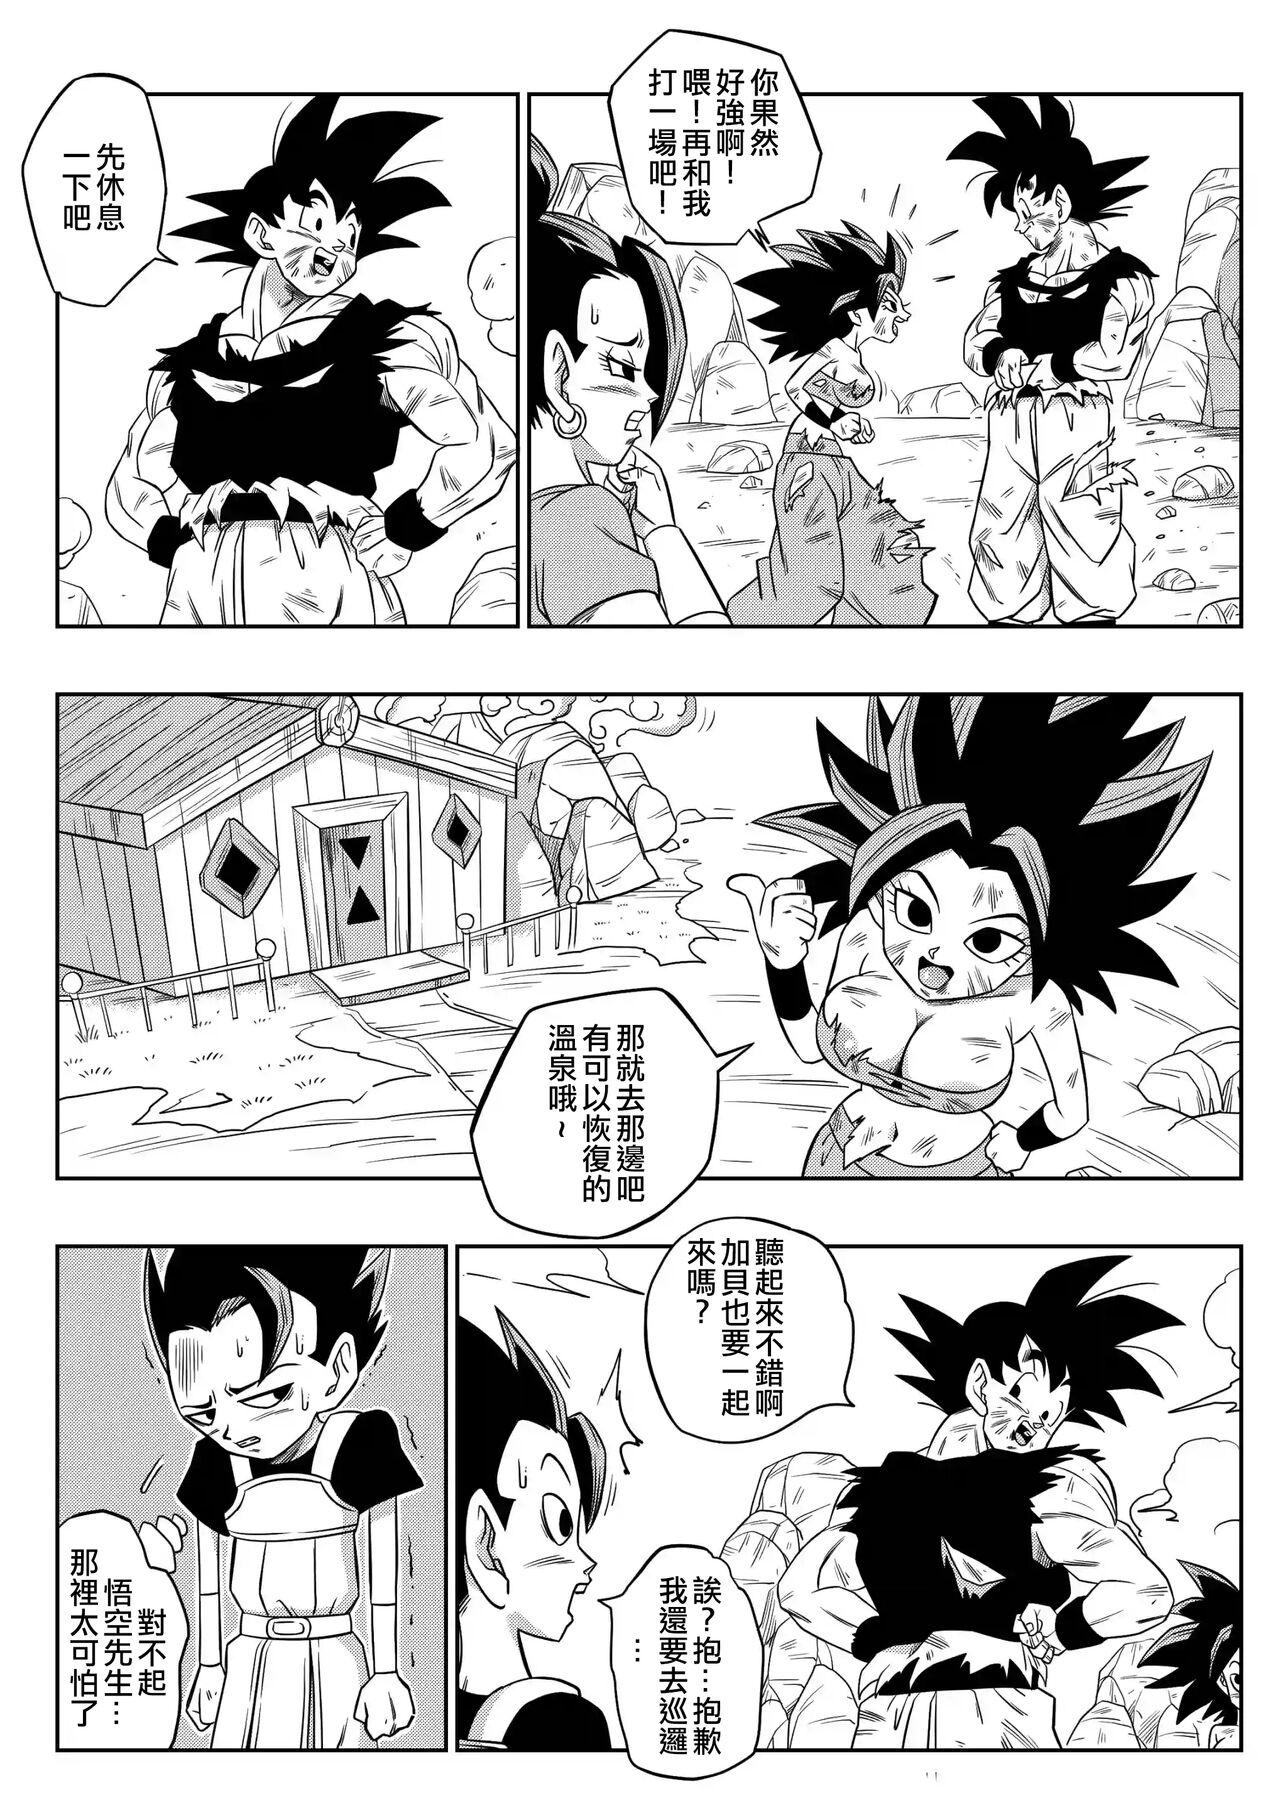 Wet Pussy Fight in the 6th Universe!!! - Dragon ball super Mas - Page 6